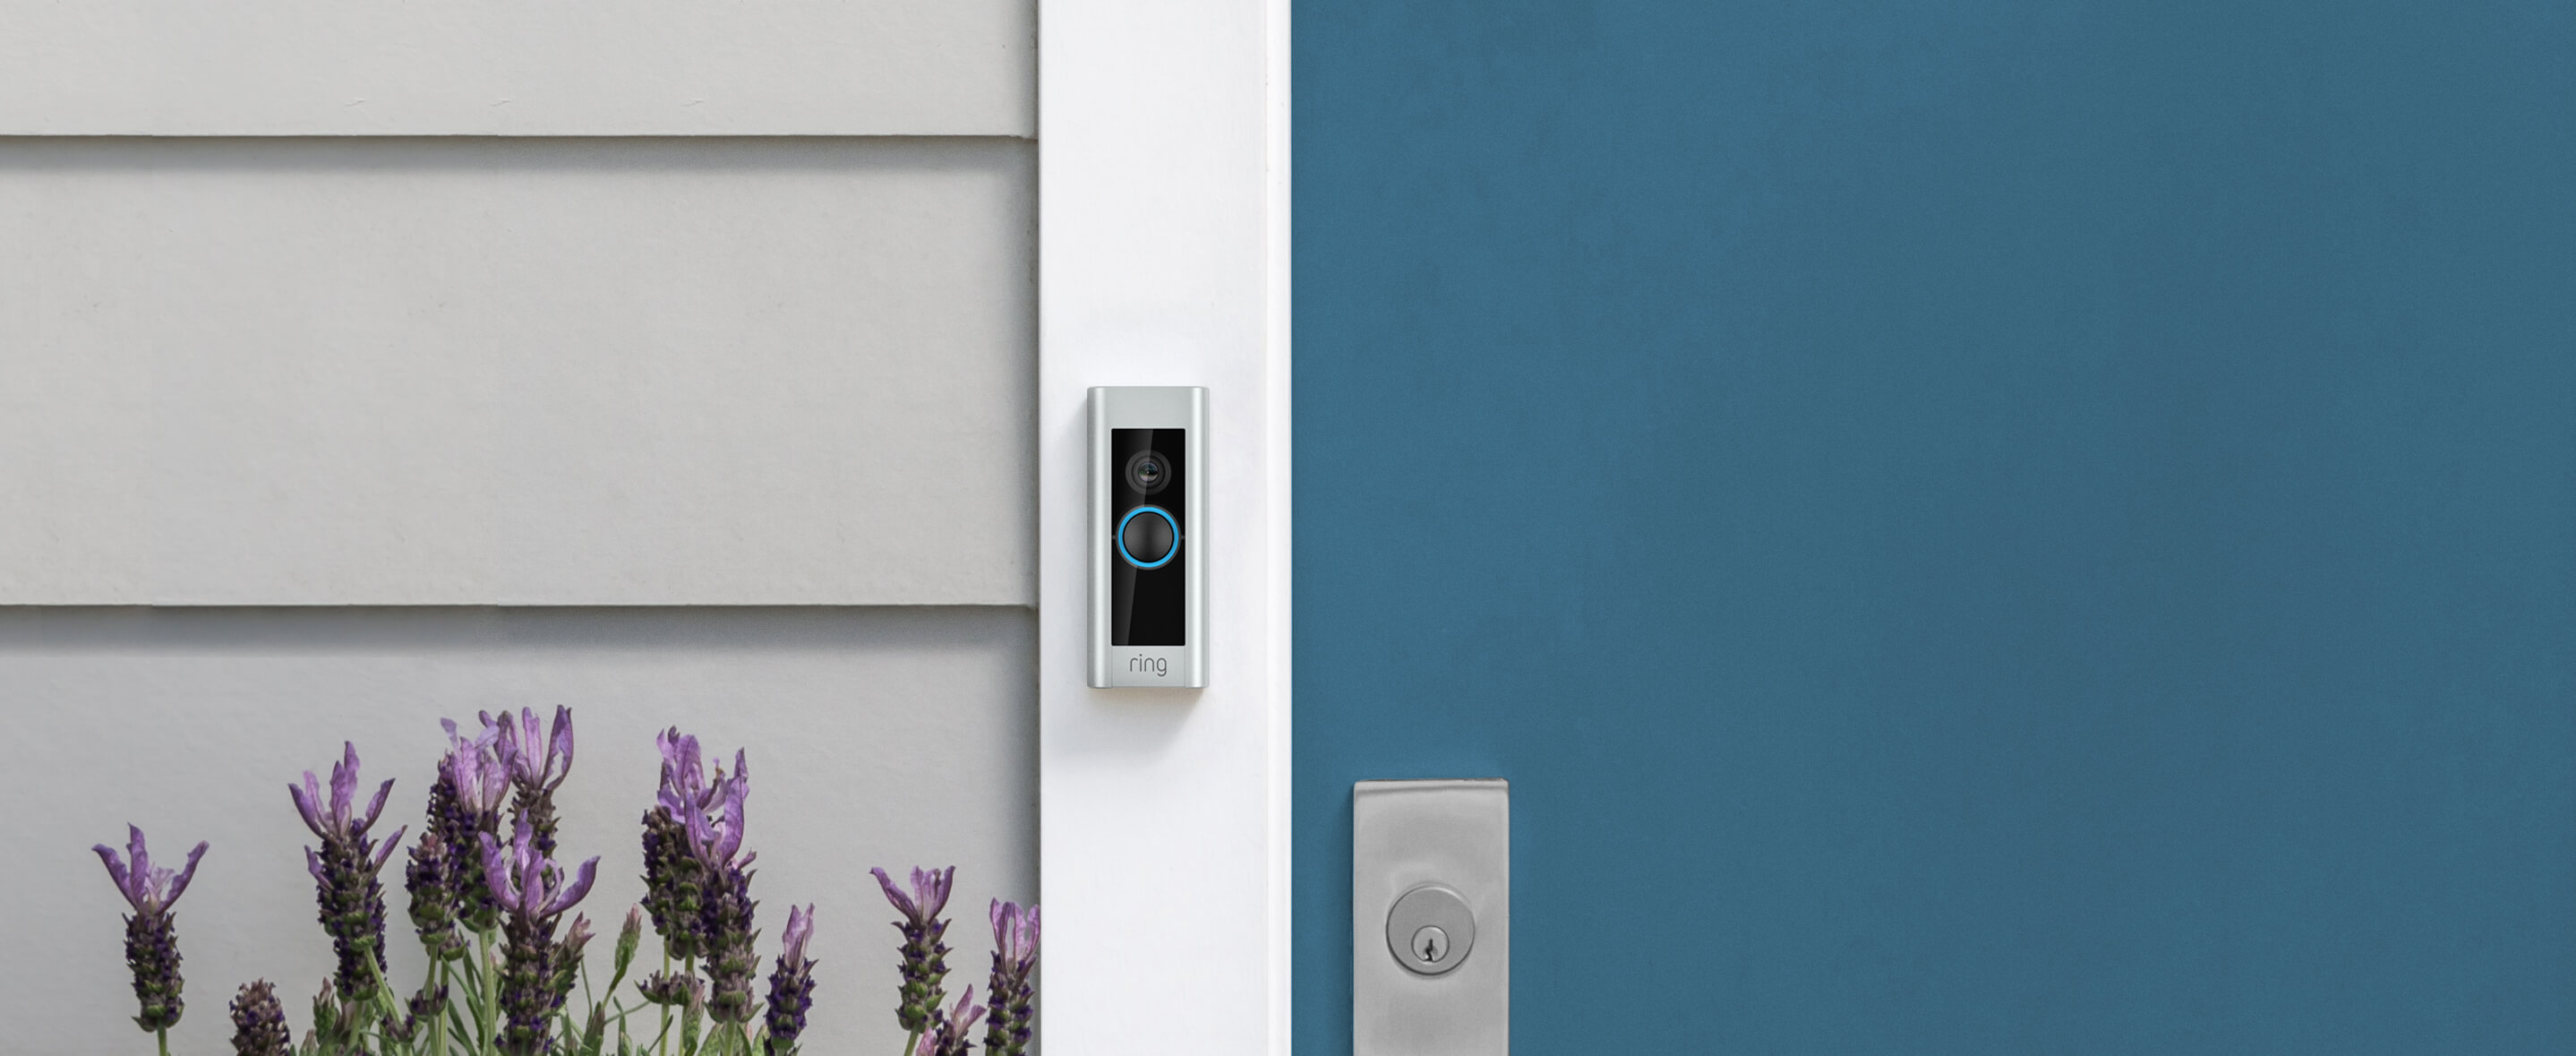 How to Install a Ring Doorbell without an Existing Doorbell